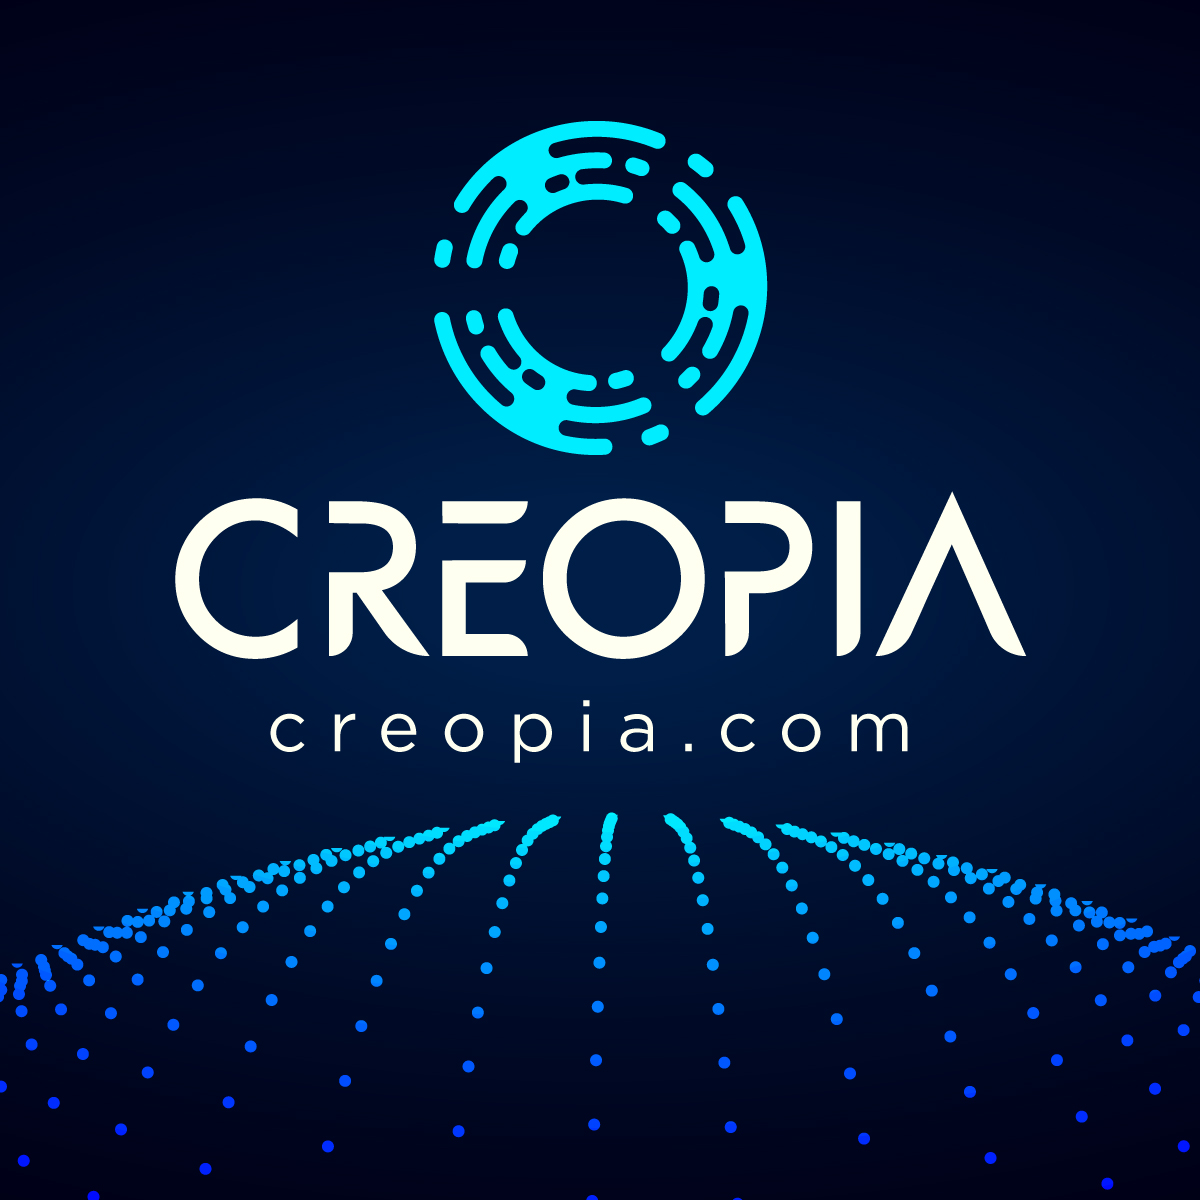 Creopia - New Creative Worlds - Brand Name by Brandizle